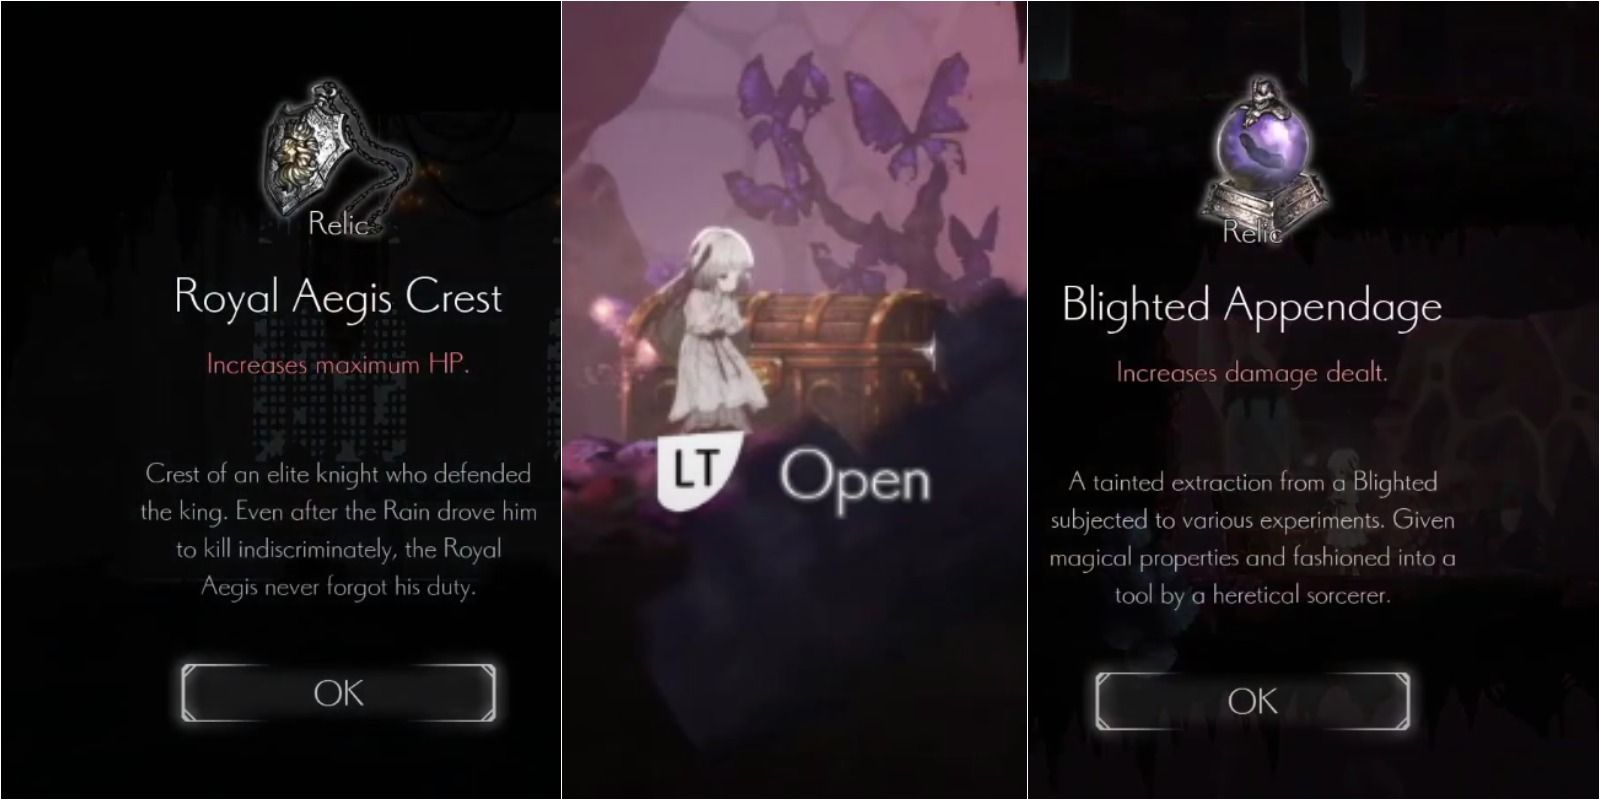 the royal aegis crest relic, lily opening a chest, and the blighted appendage relic.